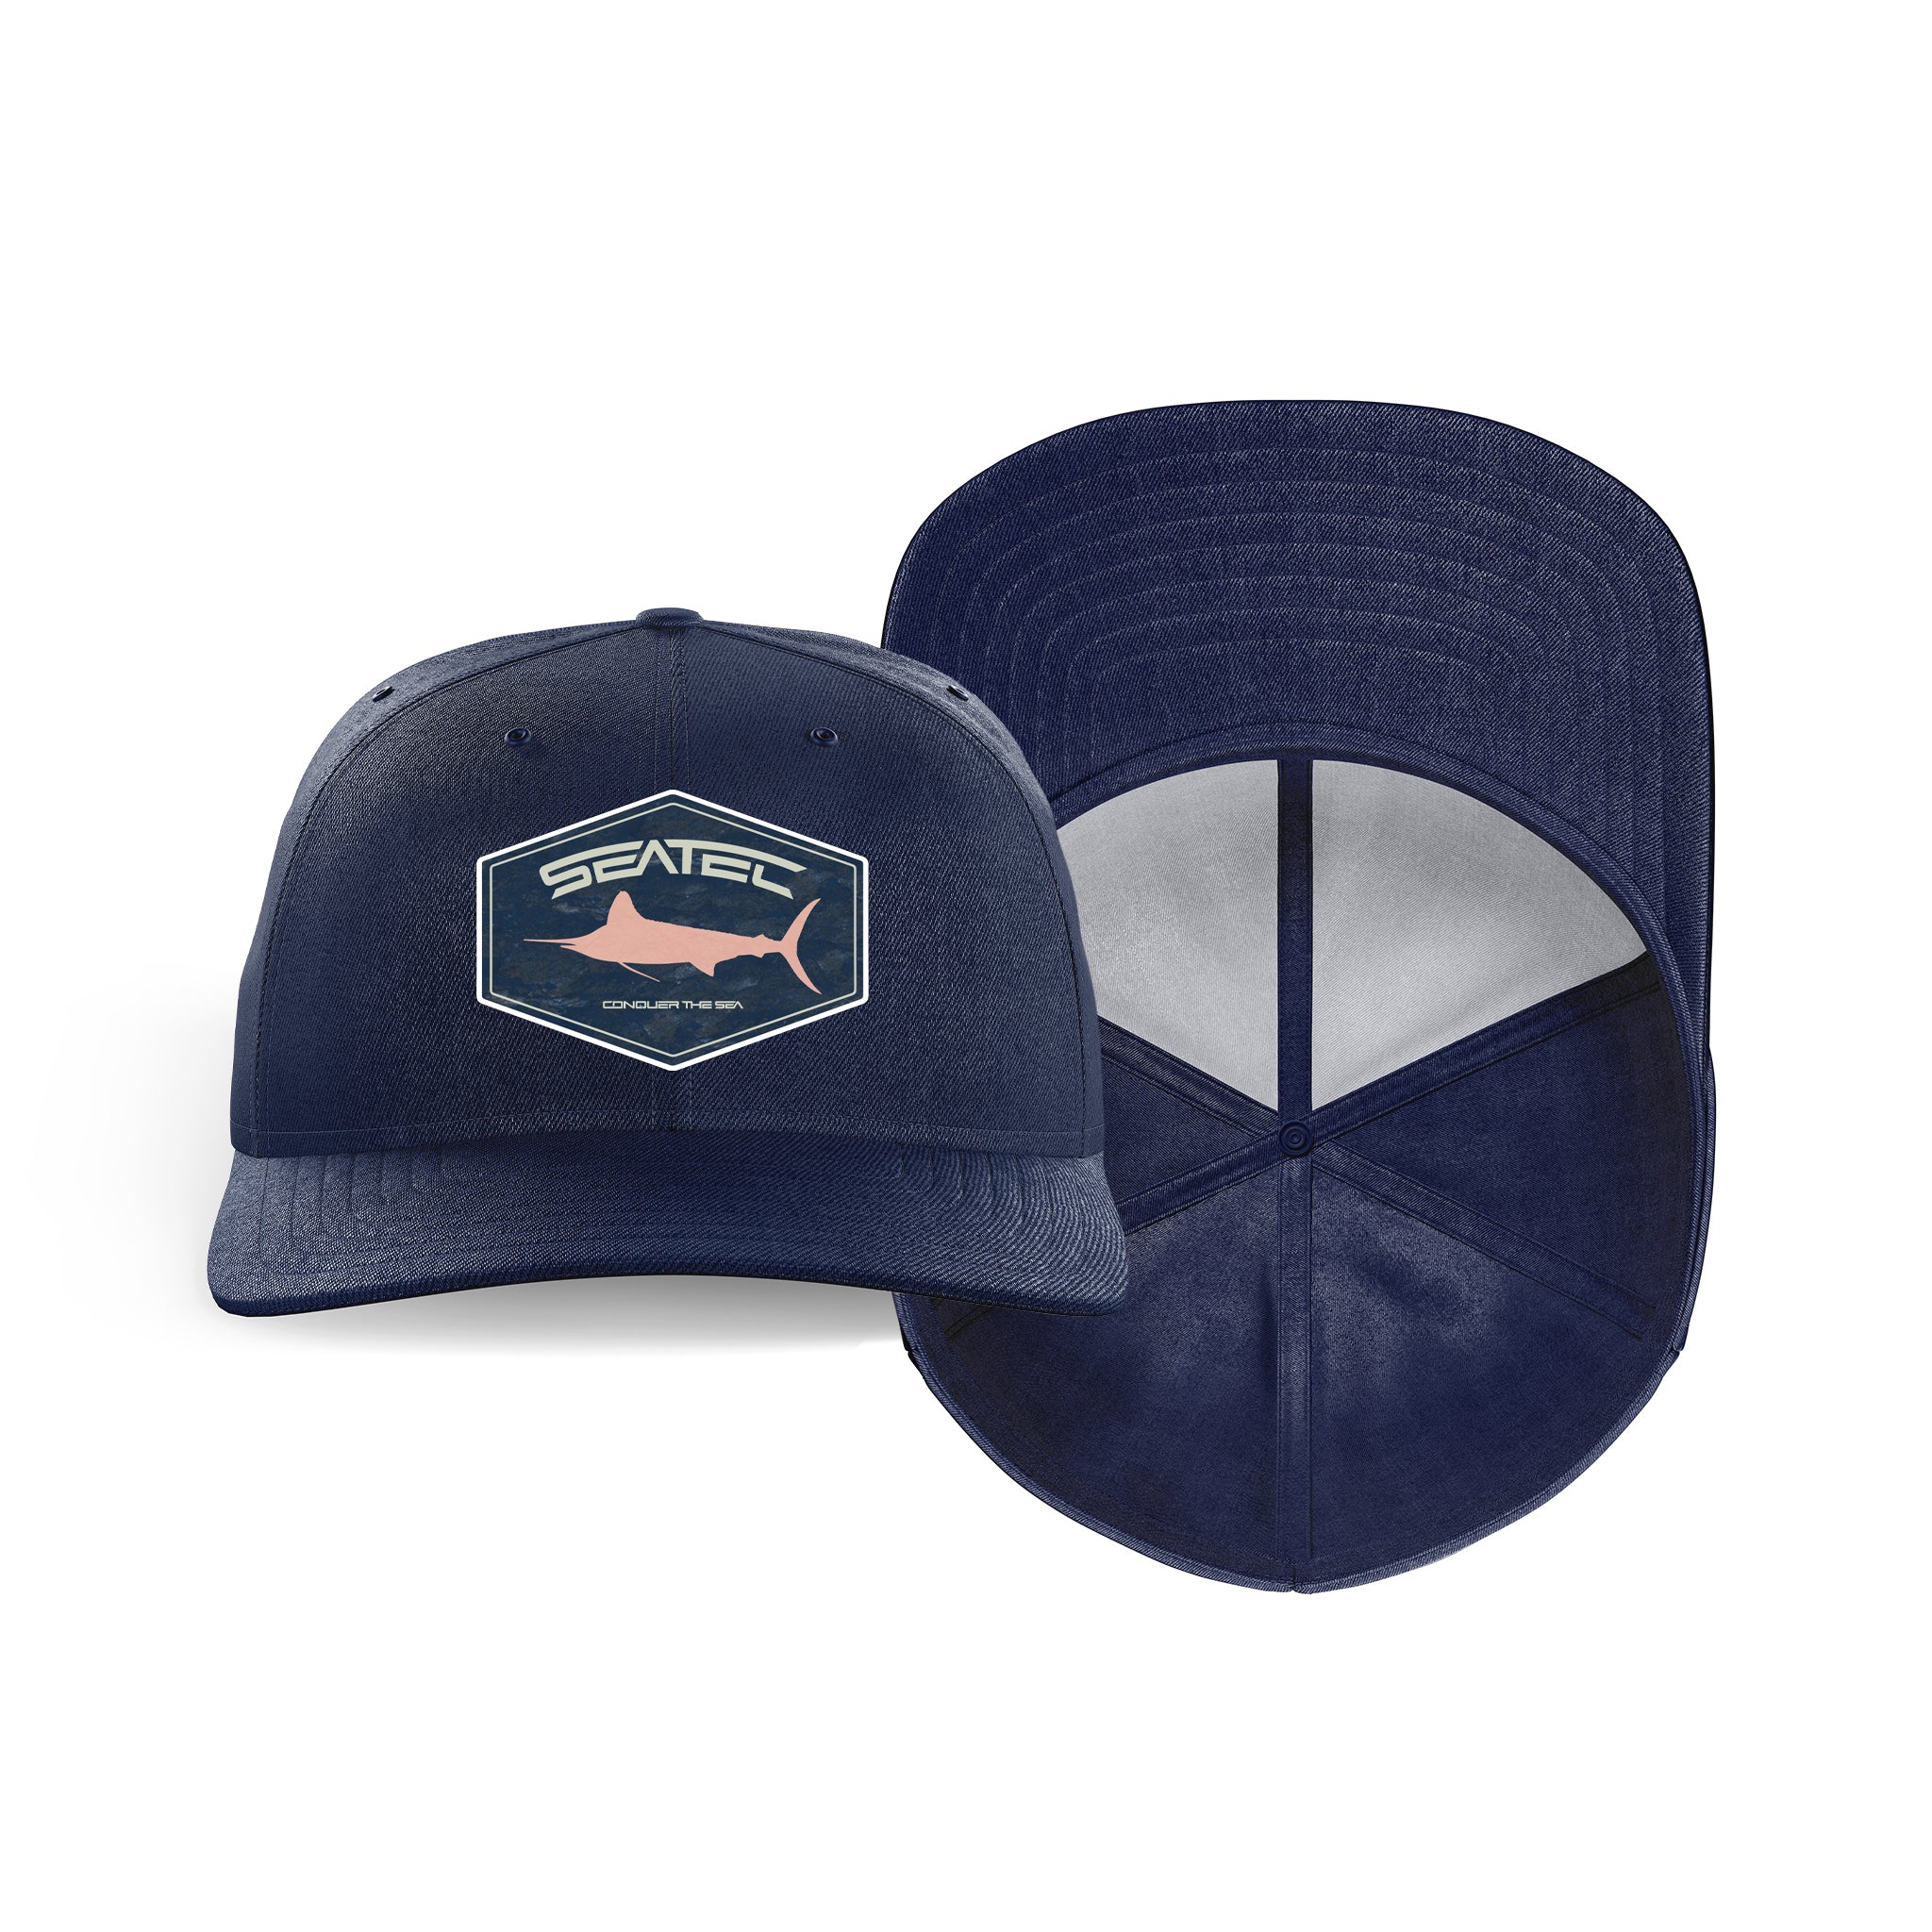 http://seatecoutfitters.com/cdn/shop/products/whitemarlinhattogether.jpg?v=1629235163